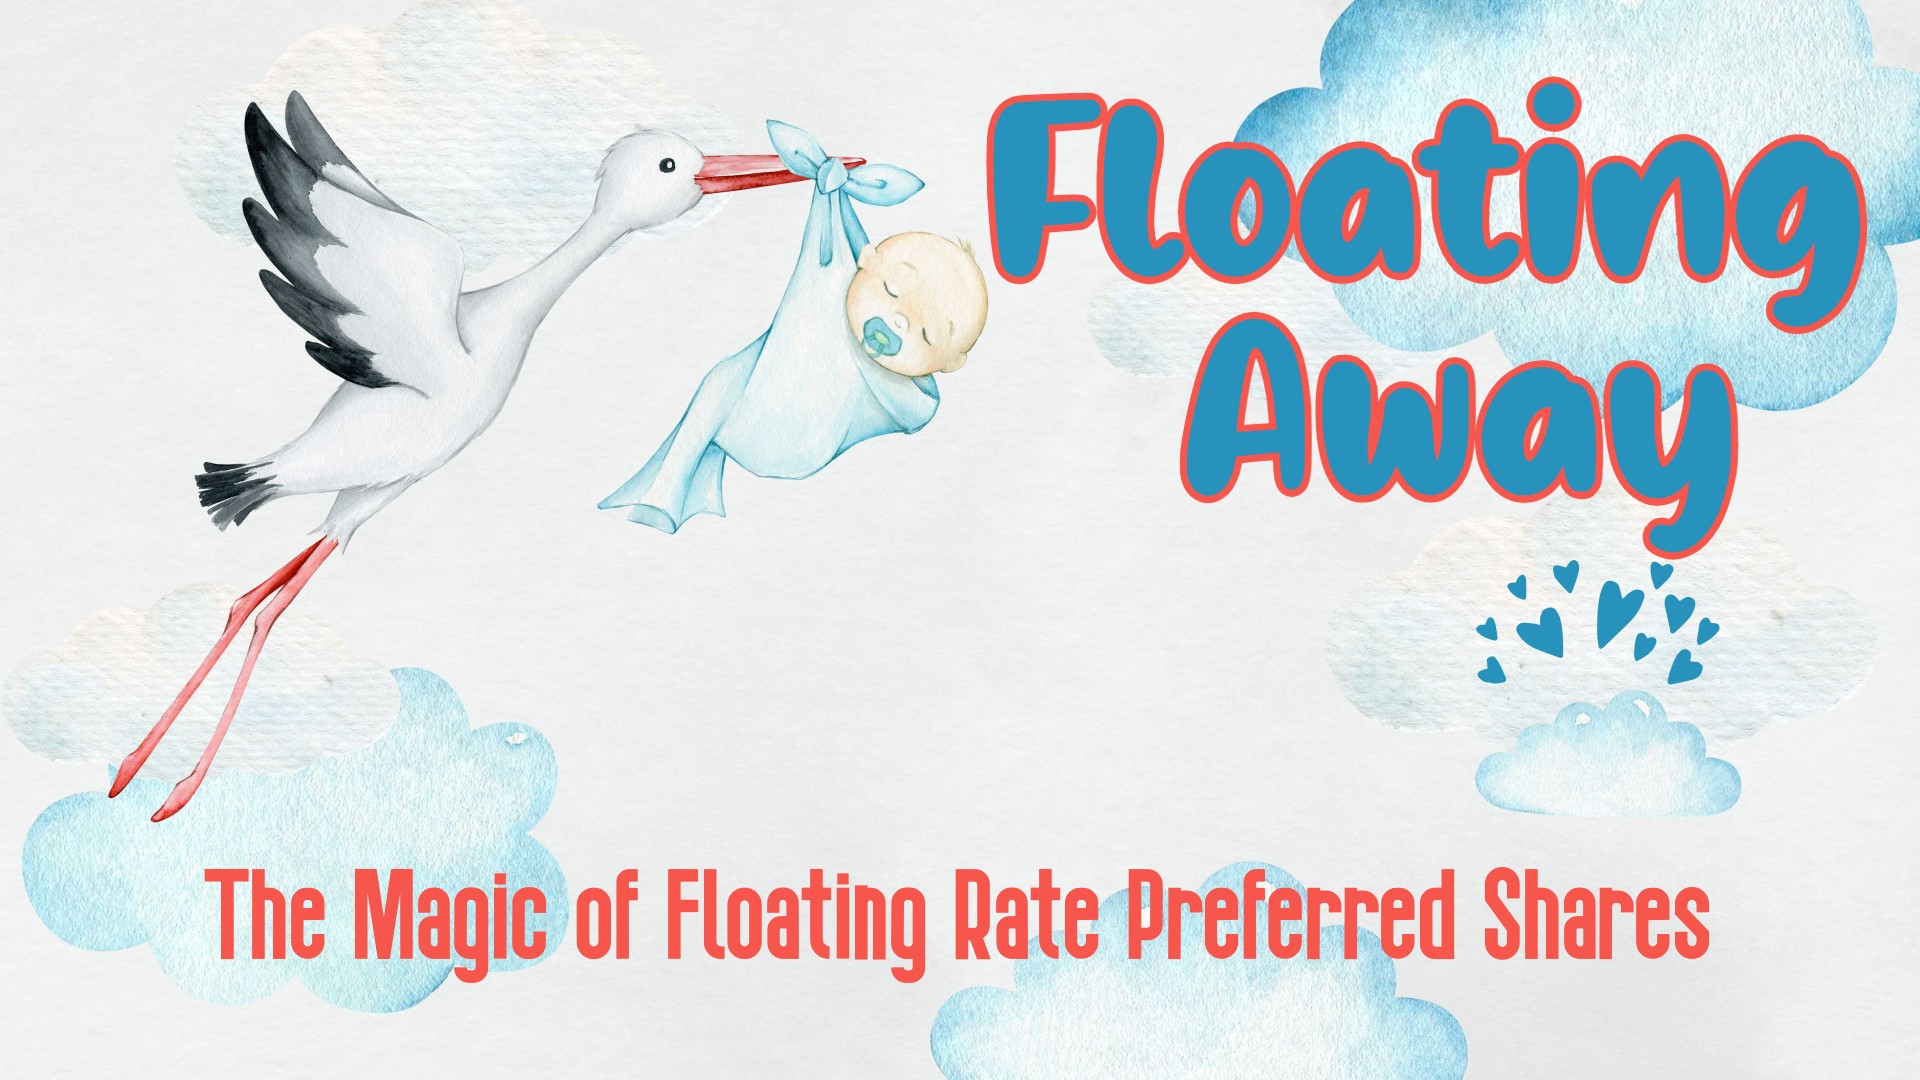 Floating Away: The Magic of Floating Rate Preferred Shares